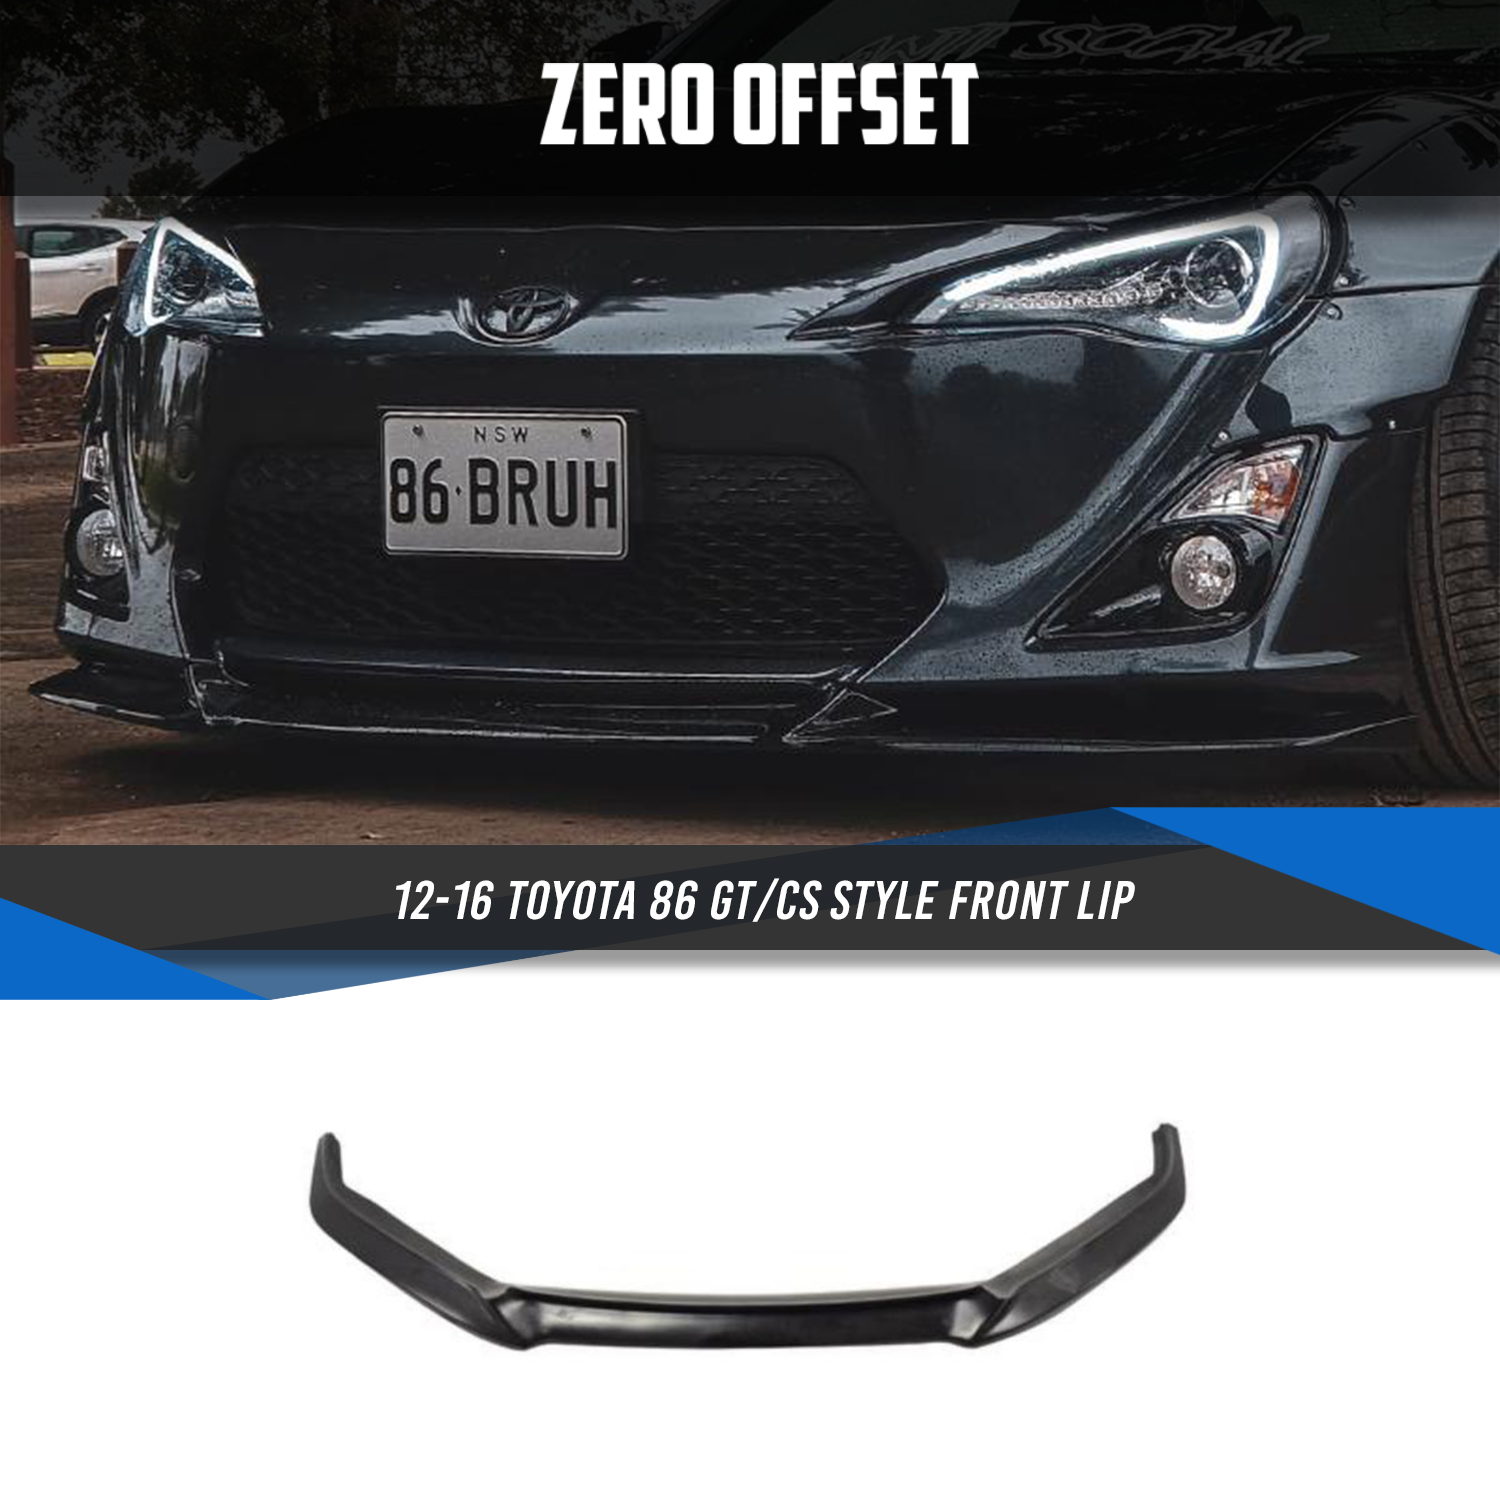 Zero Offset  GT/CS Style Front Lip for 12-16 Toyota 86 (ZN6) - MODE Auto Concepts